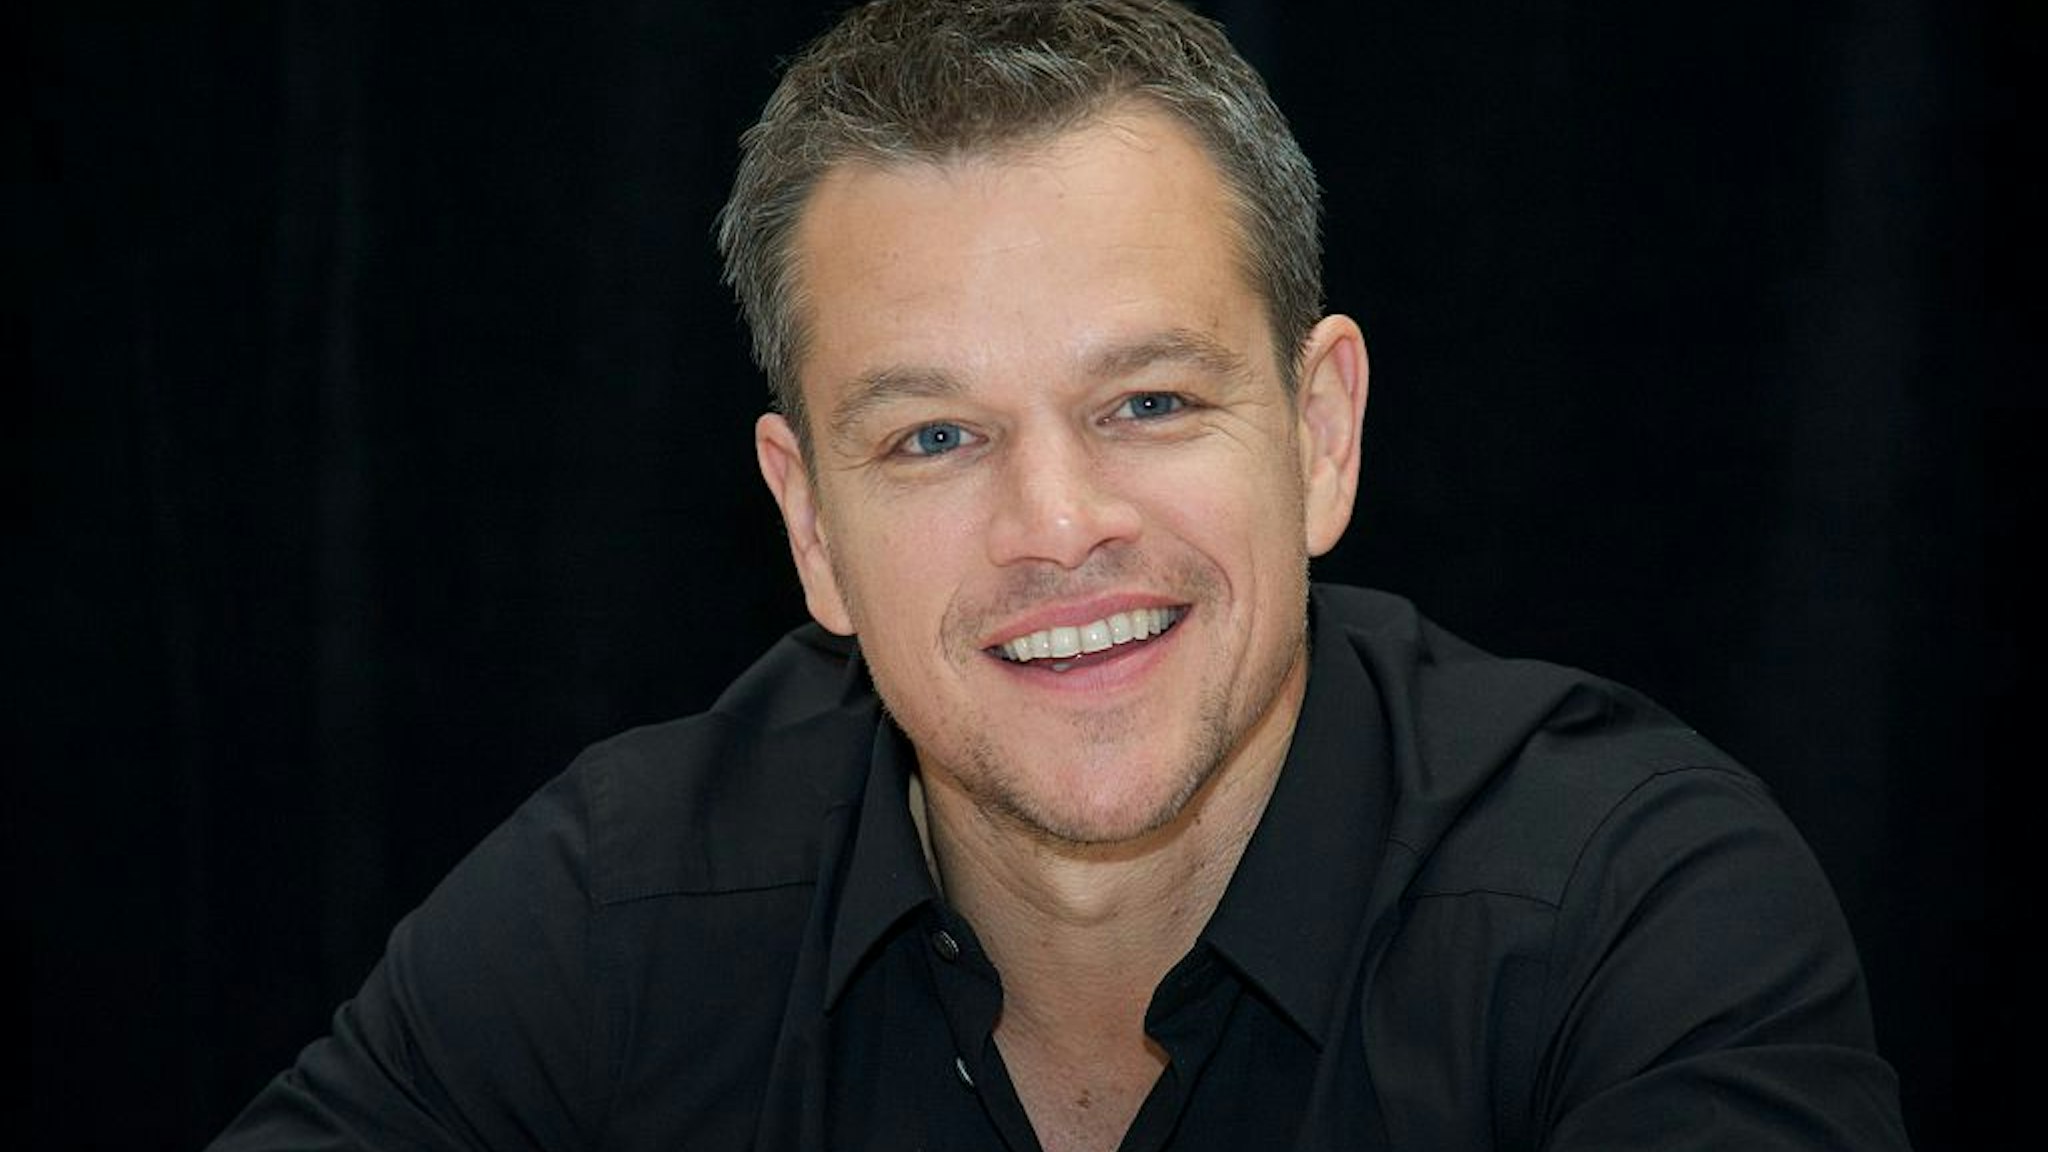 TORONTO, ON - SEPTEMBER 11: Matt Damon at "The Martian" Press Conference at the Ritz Carlton on September 11, 2015 in Toronto, Ontario. (Photo by Vera Anderson/WireImage)